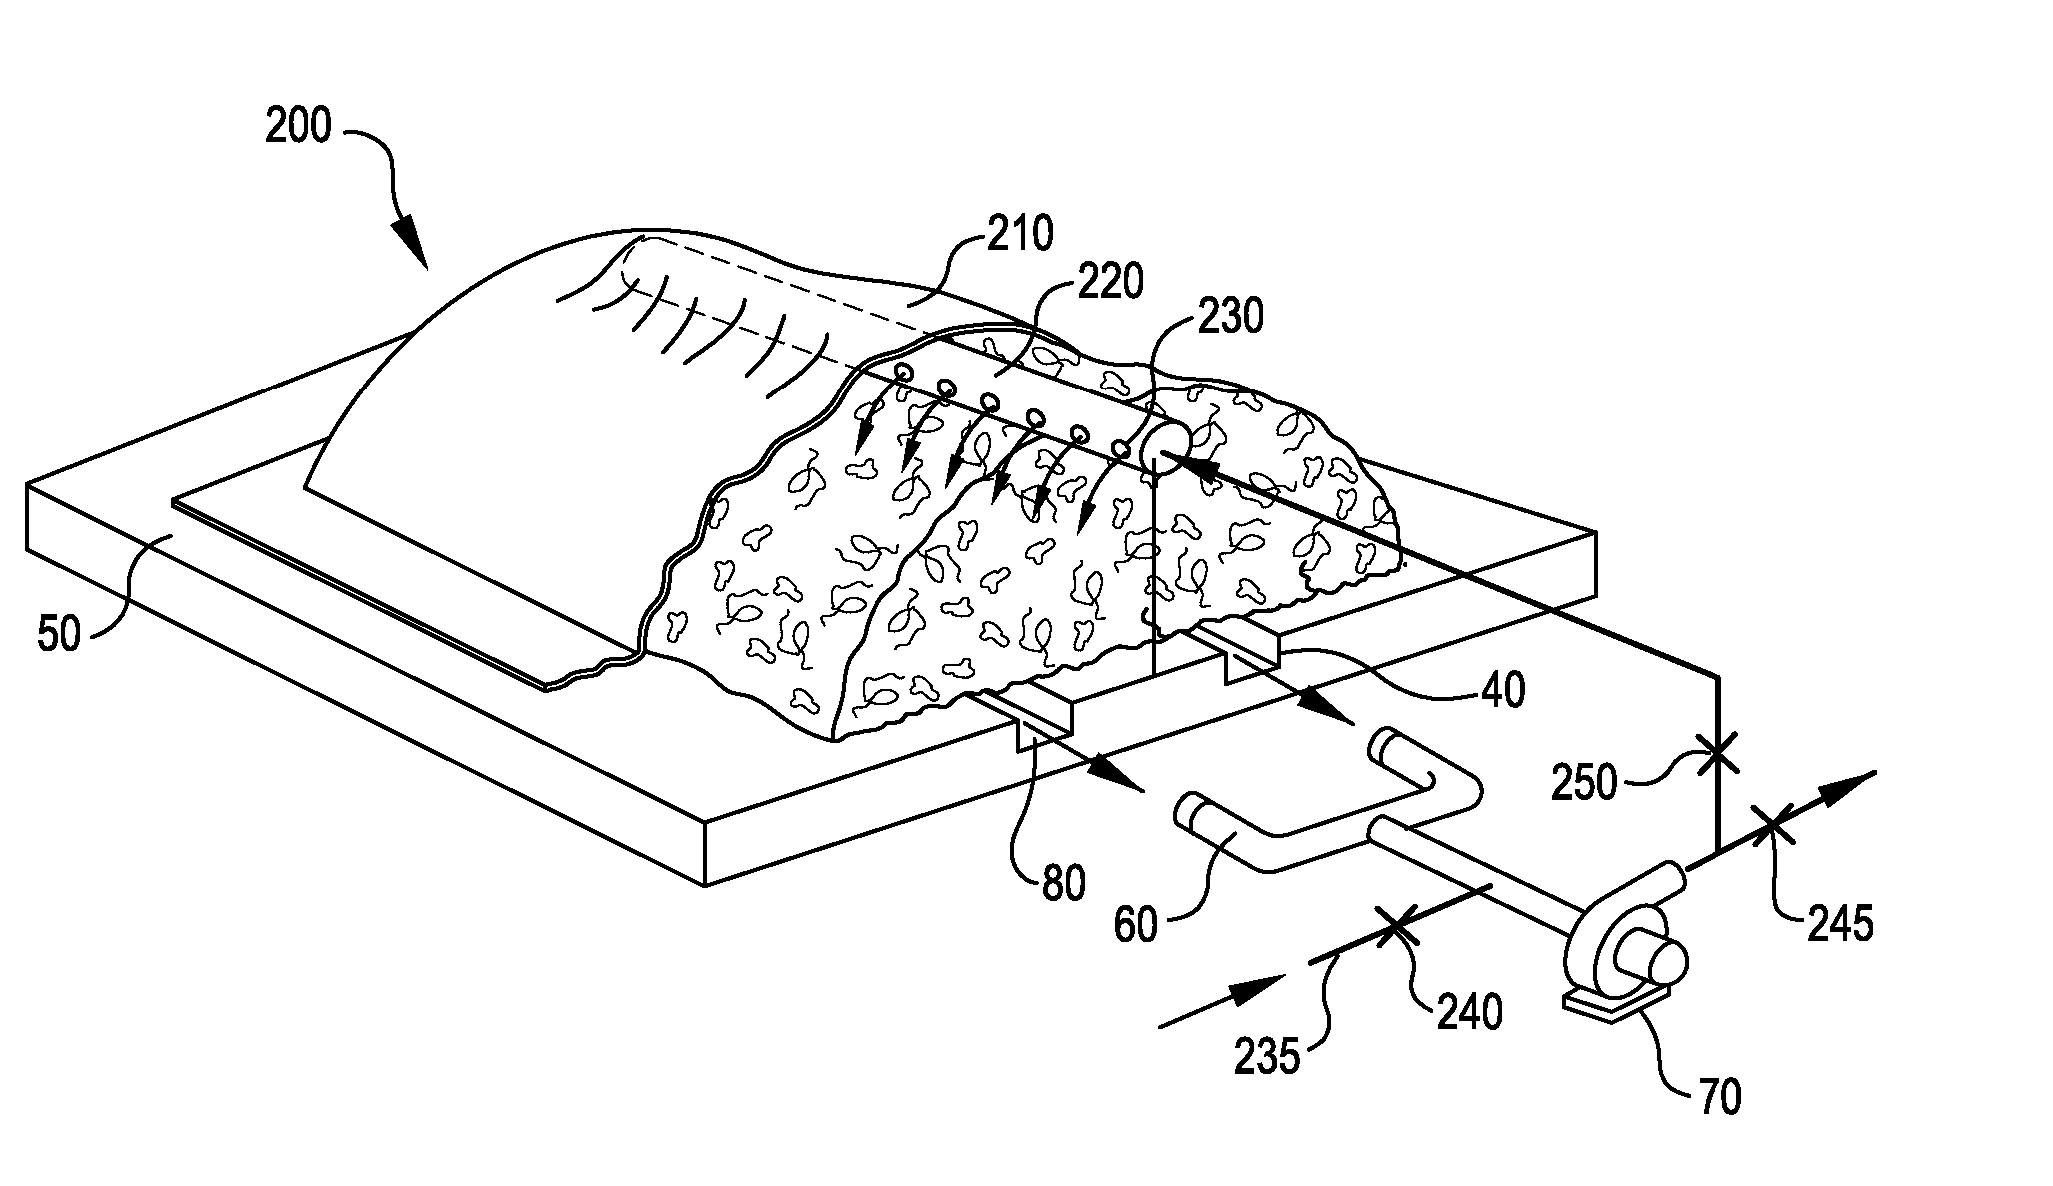 Systems and Methods for Generating Compost